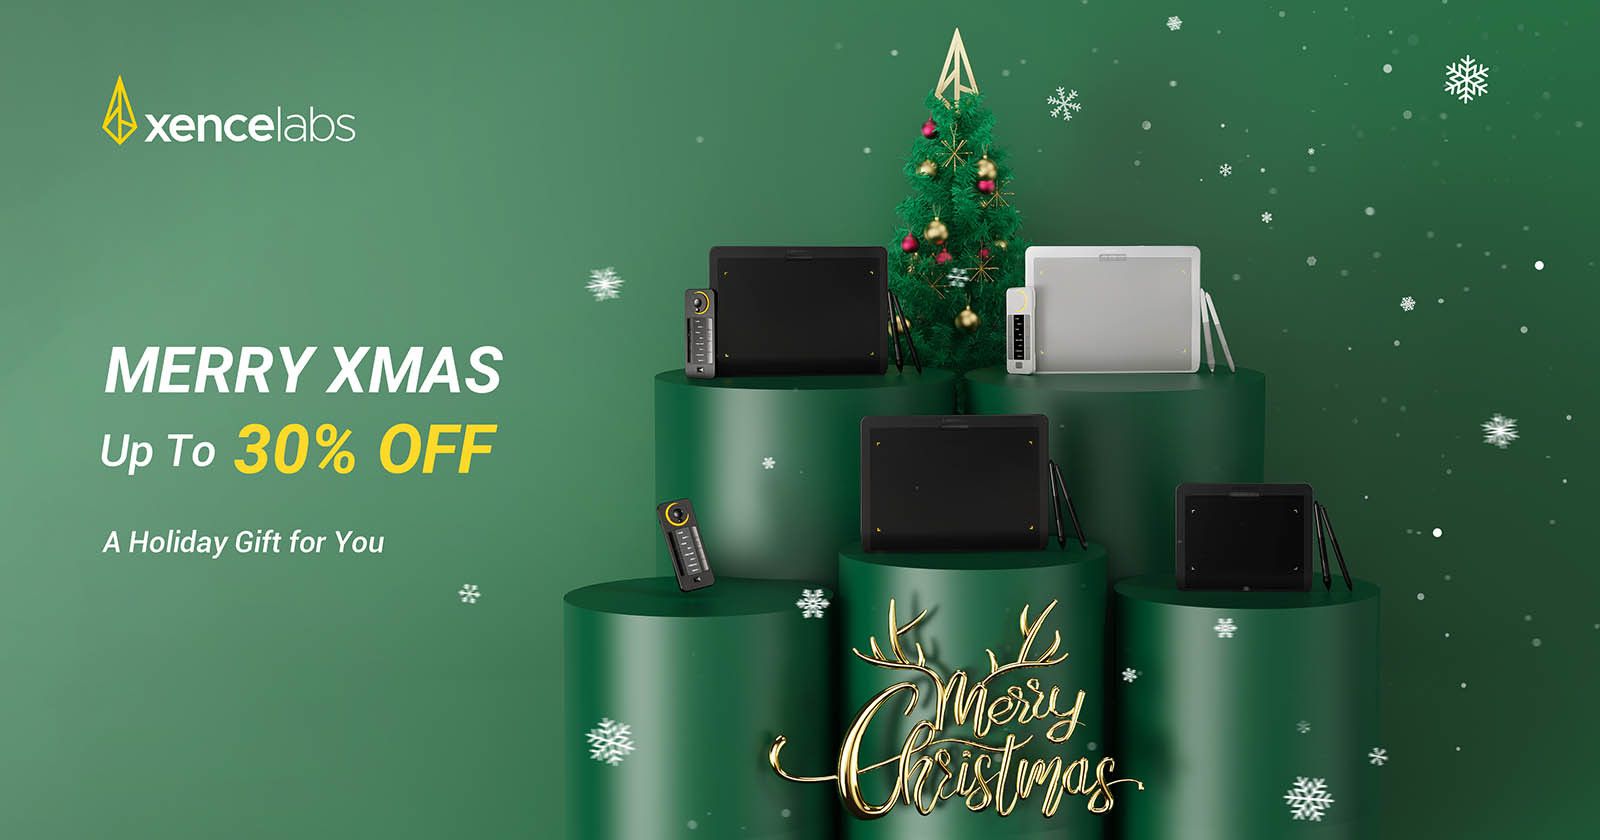 Holiday Deal: Xencelabs is Bringing in the New Year with some X-tra Special X-mas Deals!